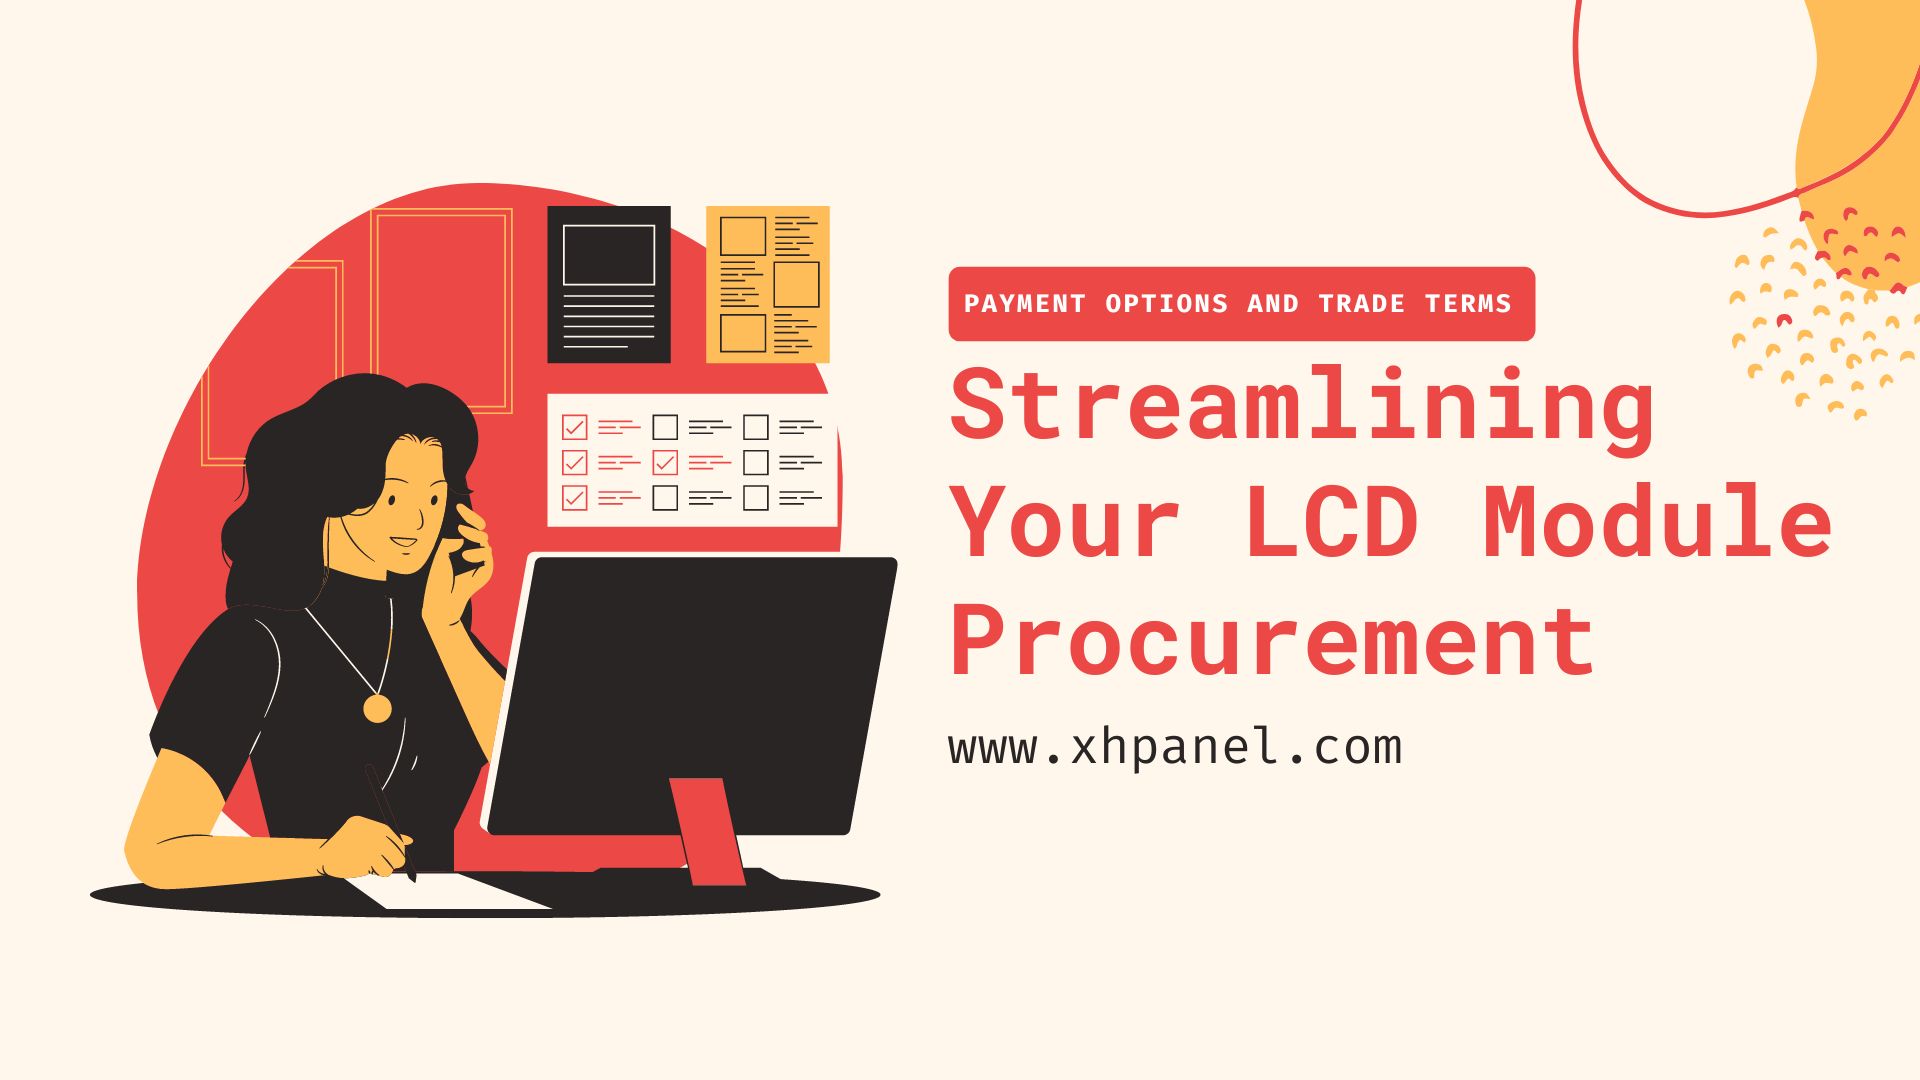 Payment Options and Trade Terms: Streamlining Your LCD Module Procurement